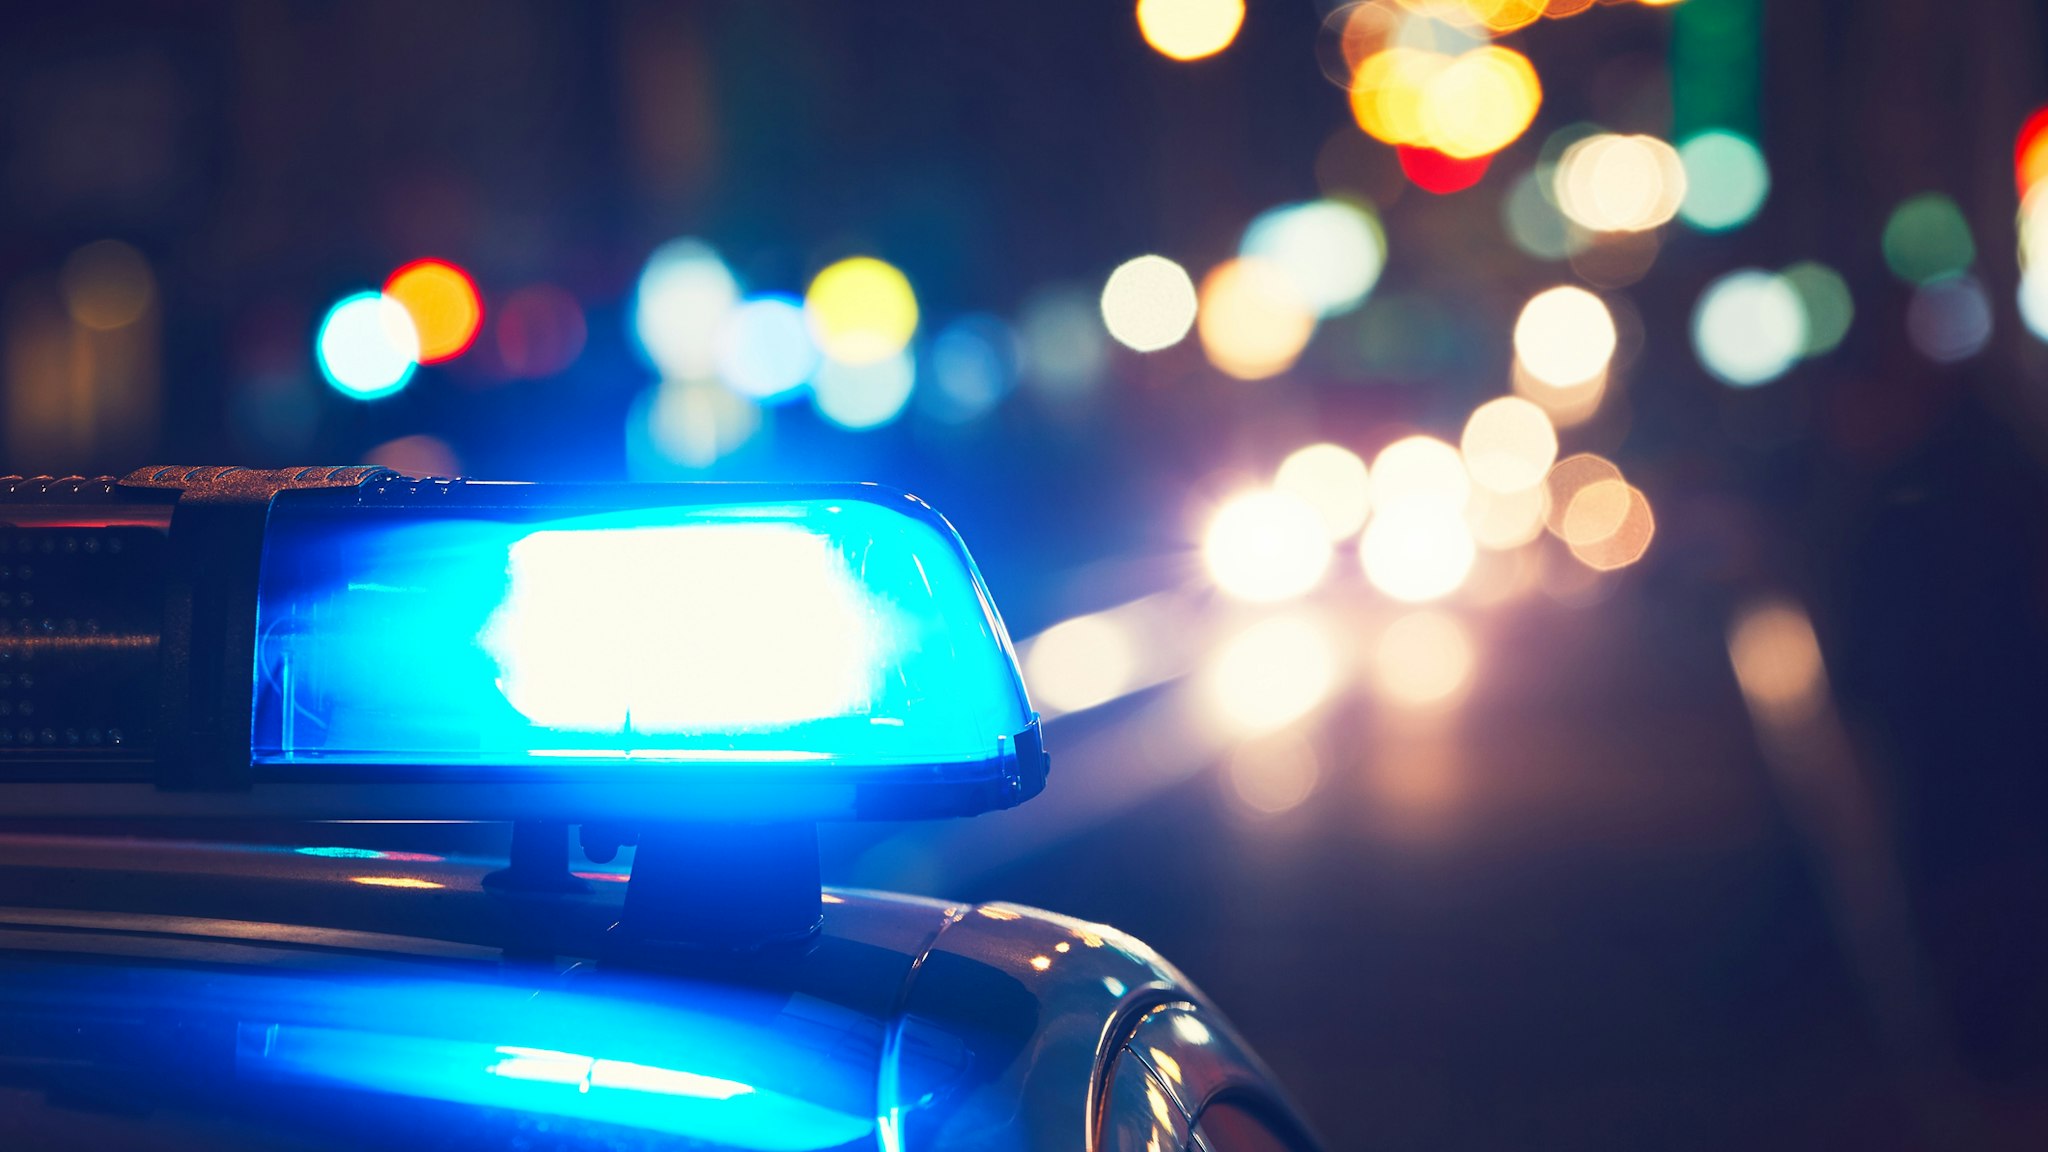 Close-Up Of Blue Siren On Police Car At Night - stock photo